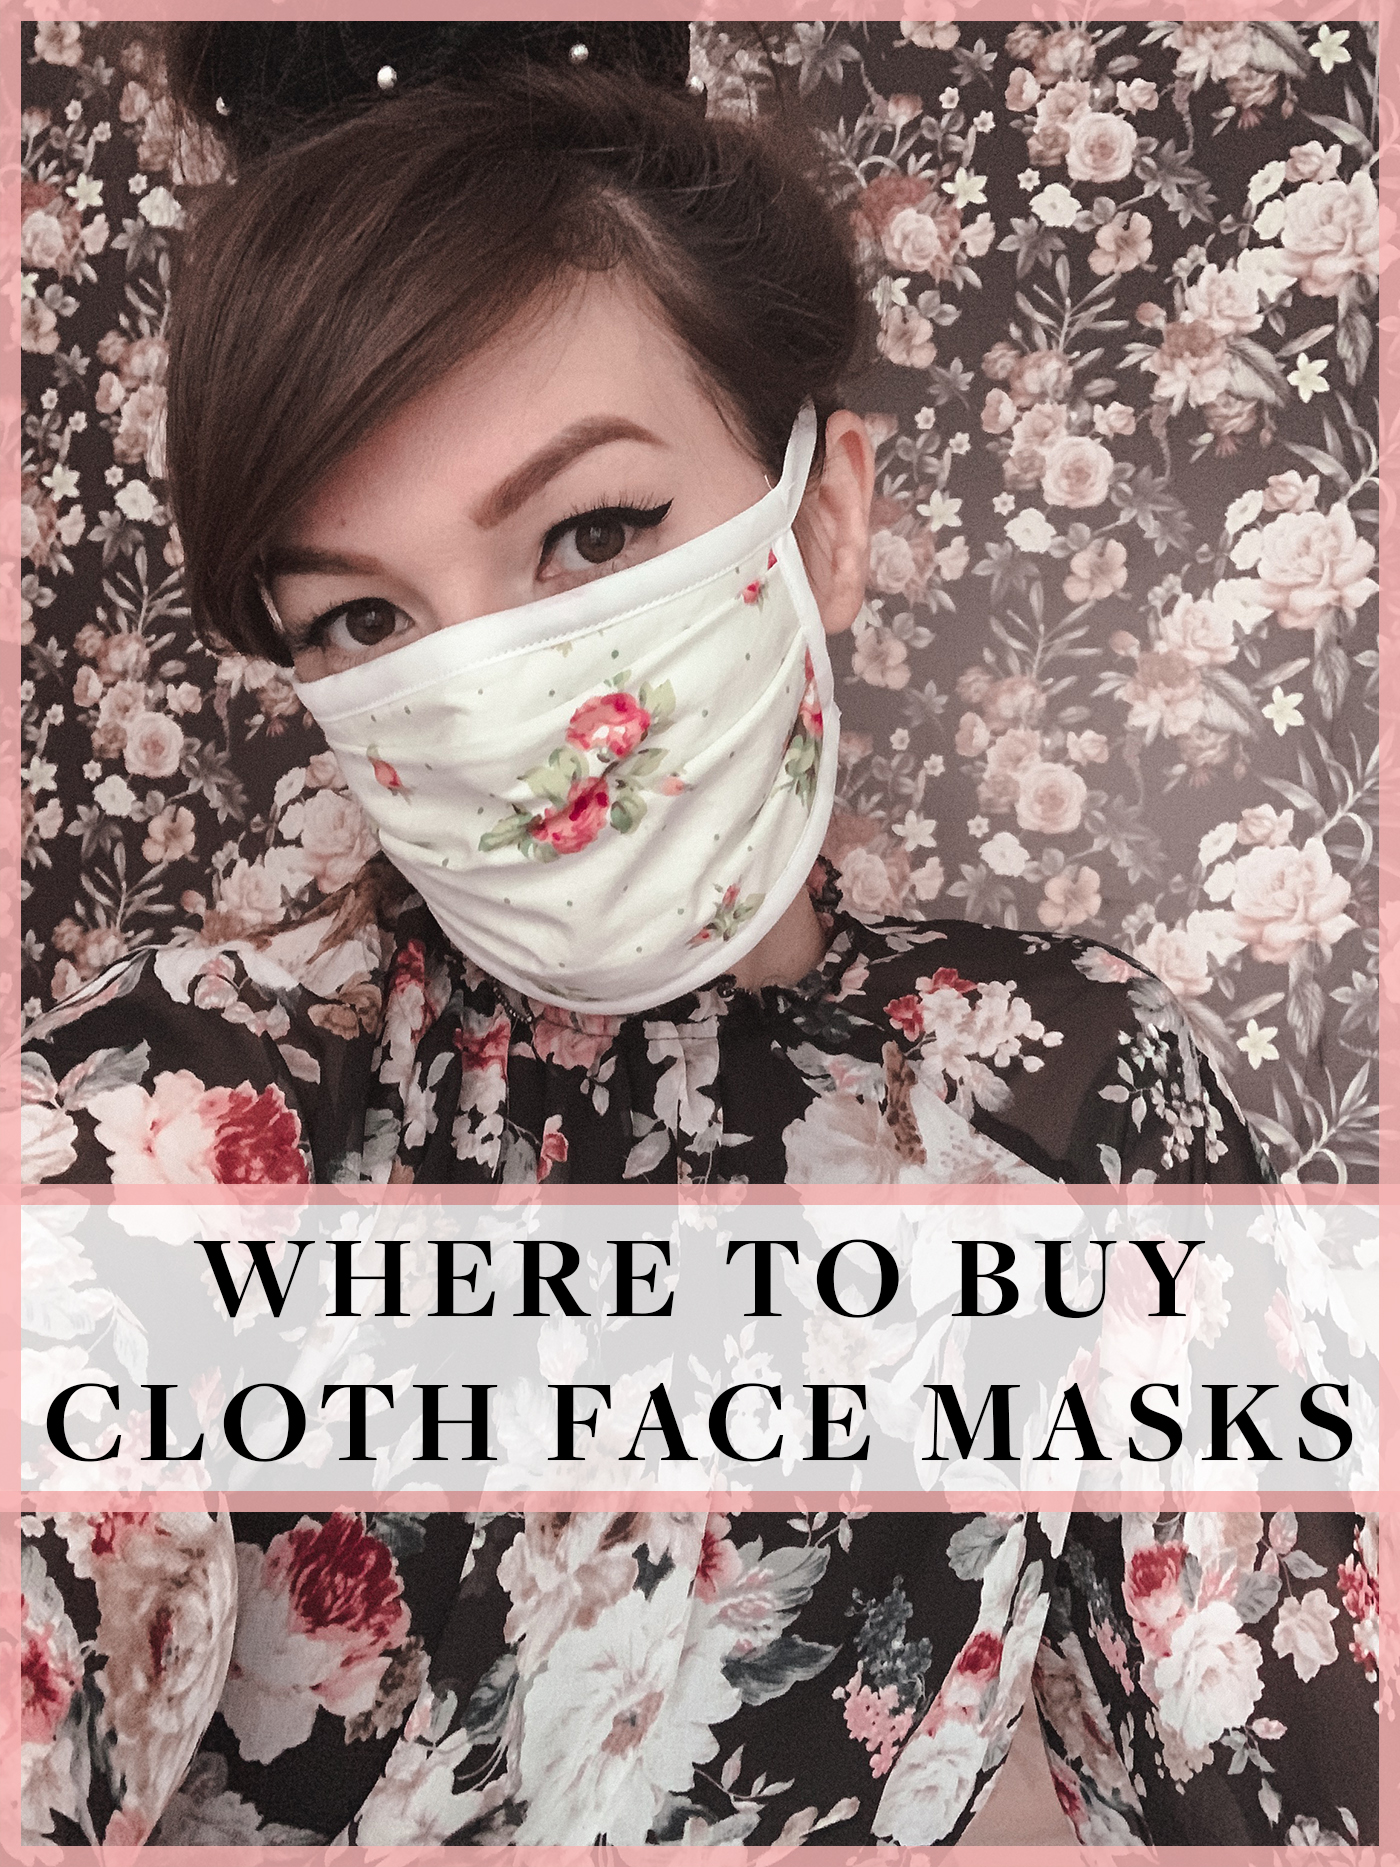 Where to buy fabric face masks